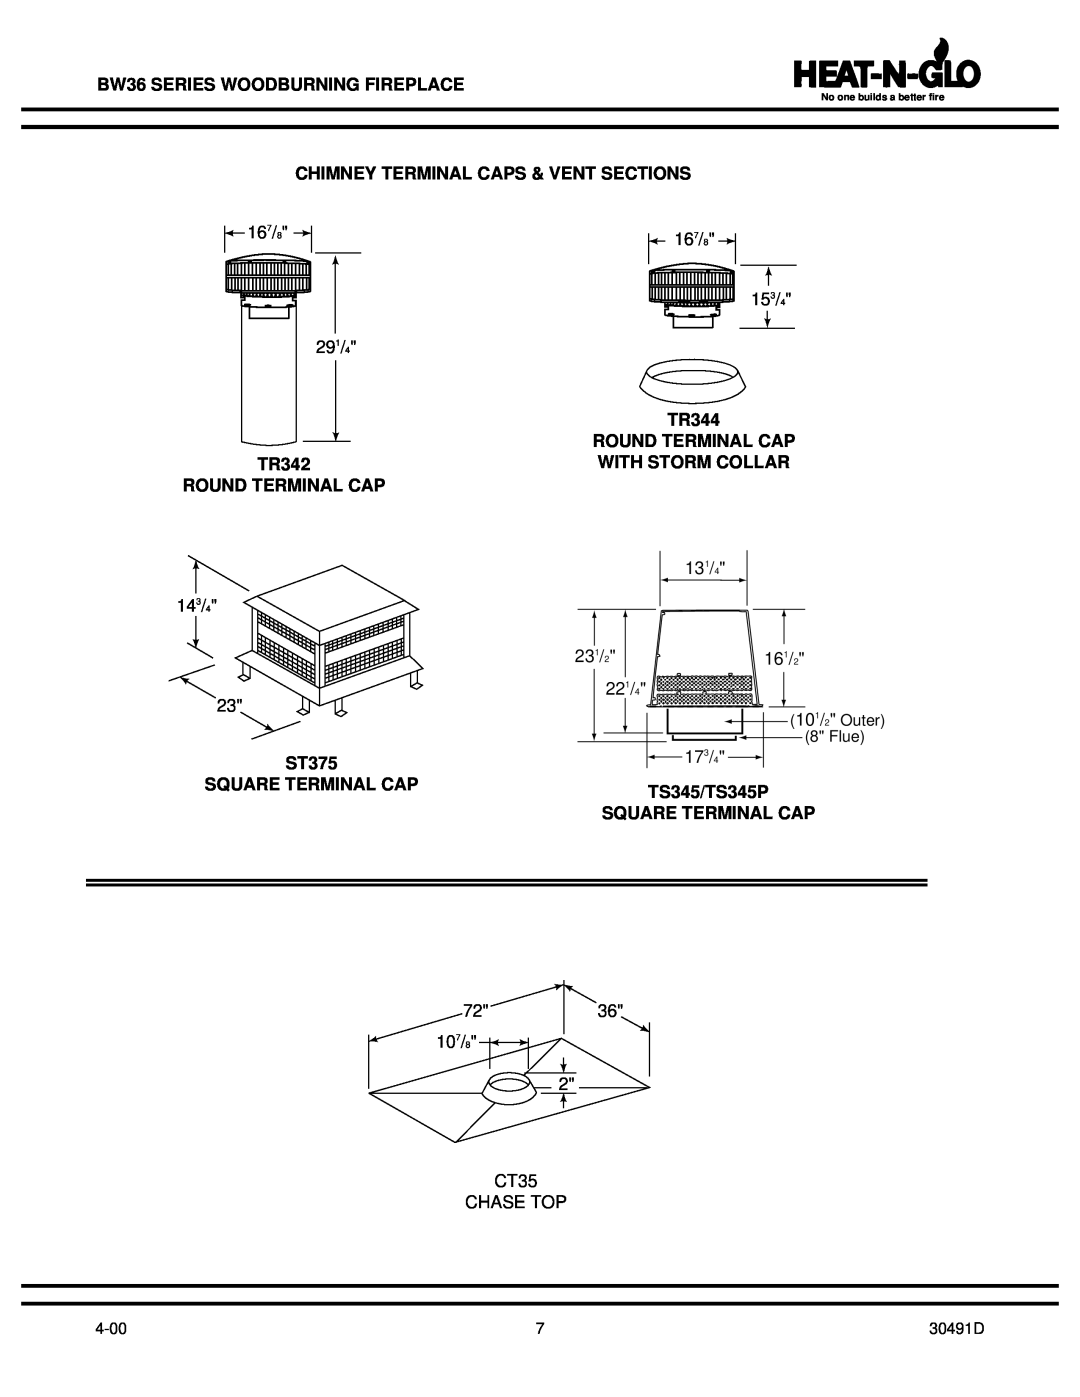 Heat & Glo LifeStyle BW36 Chimney Terminal Caps & Vent Sections, TR344, Round Terminal Cap, TR342, With Storm Collar 